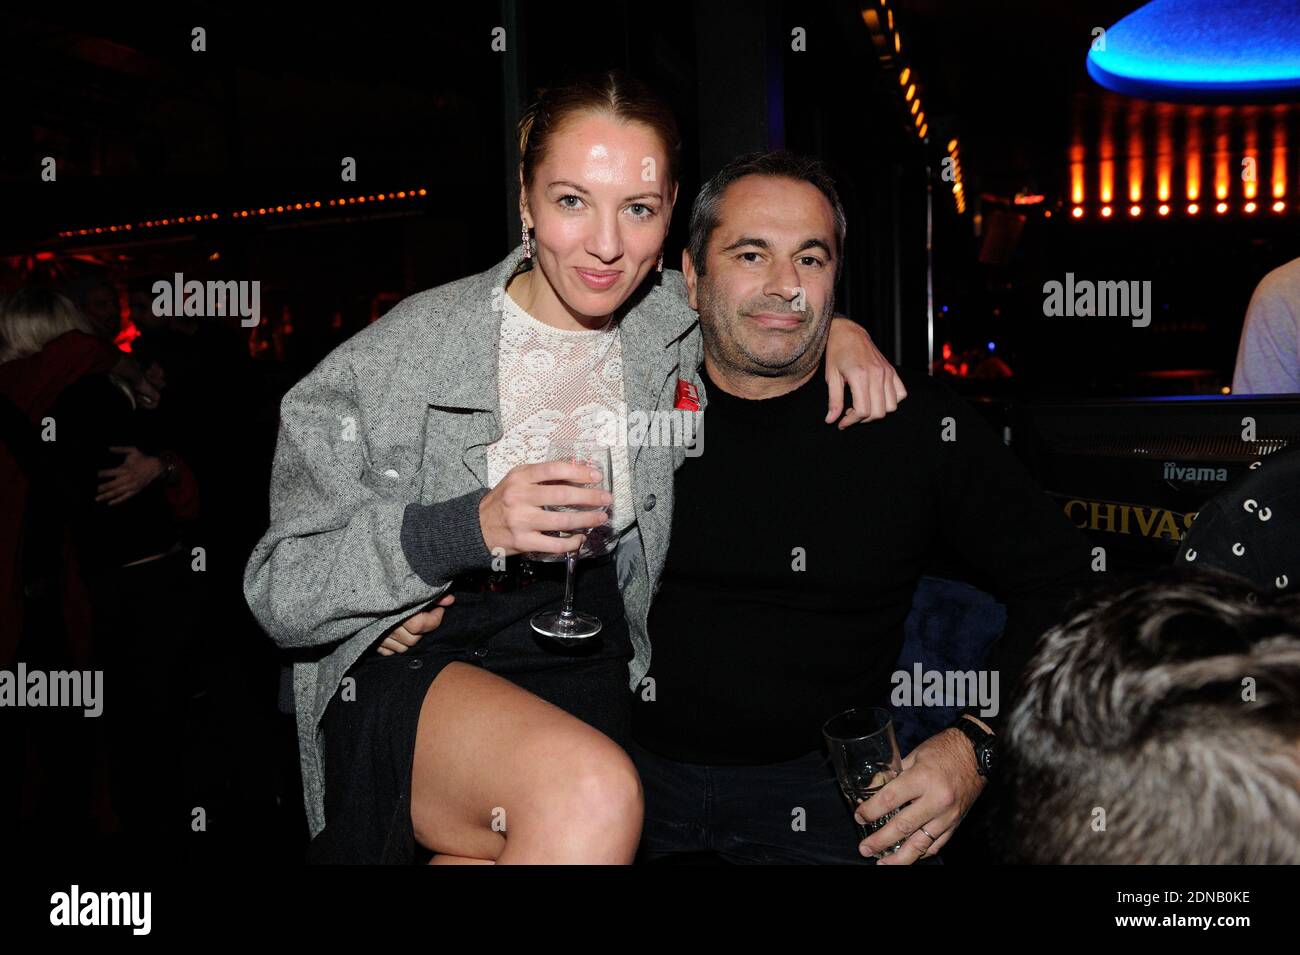 Jean-Yves Le Fur, Jennifer Eymere attending Jalouse party at l' Arc in Paris, France on January 27, 2015. Photo by Alban Wyters/ABACAPRESS.COM Stock Photo